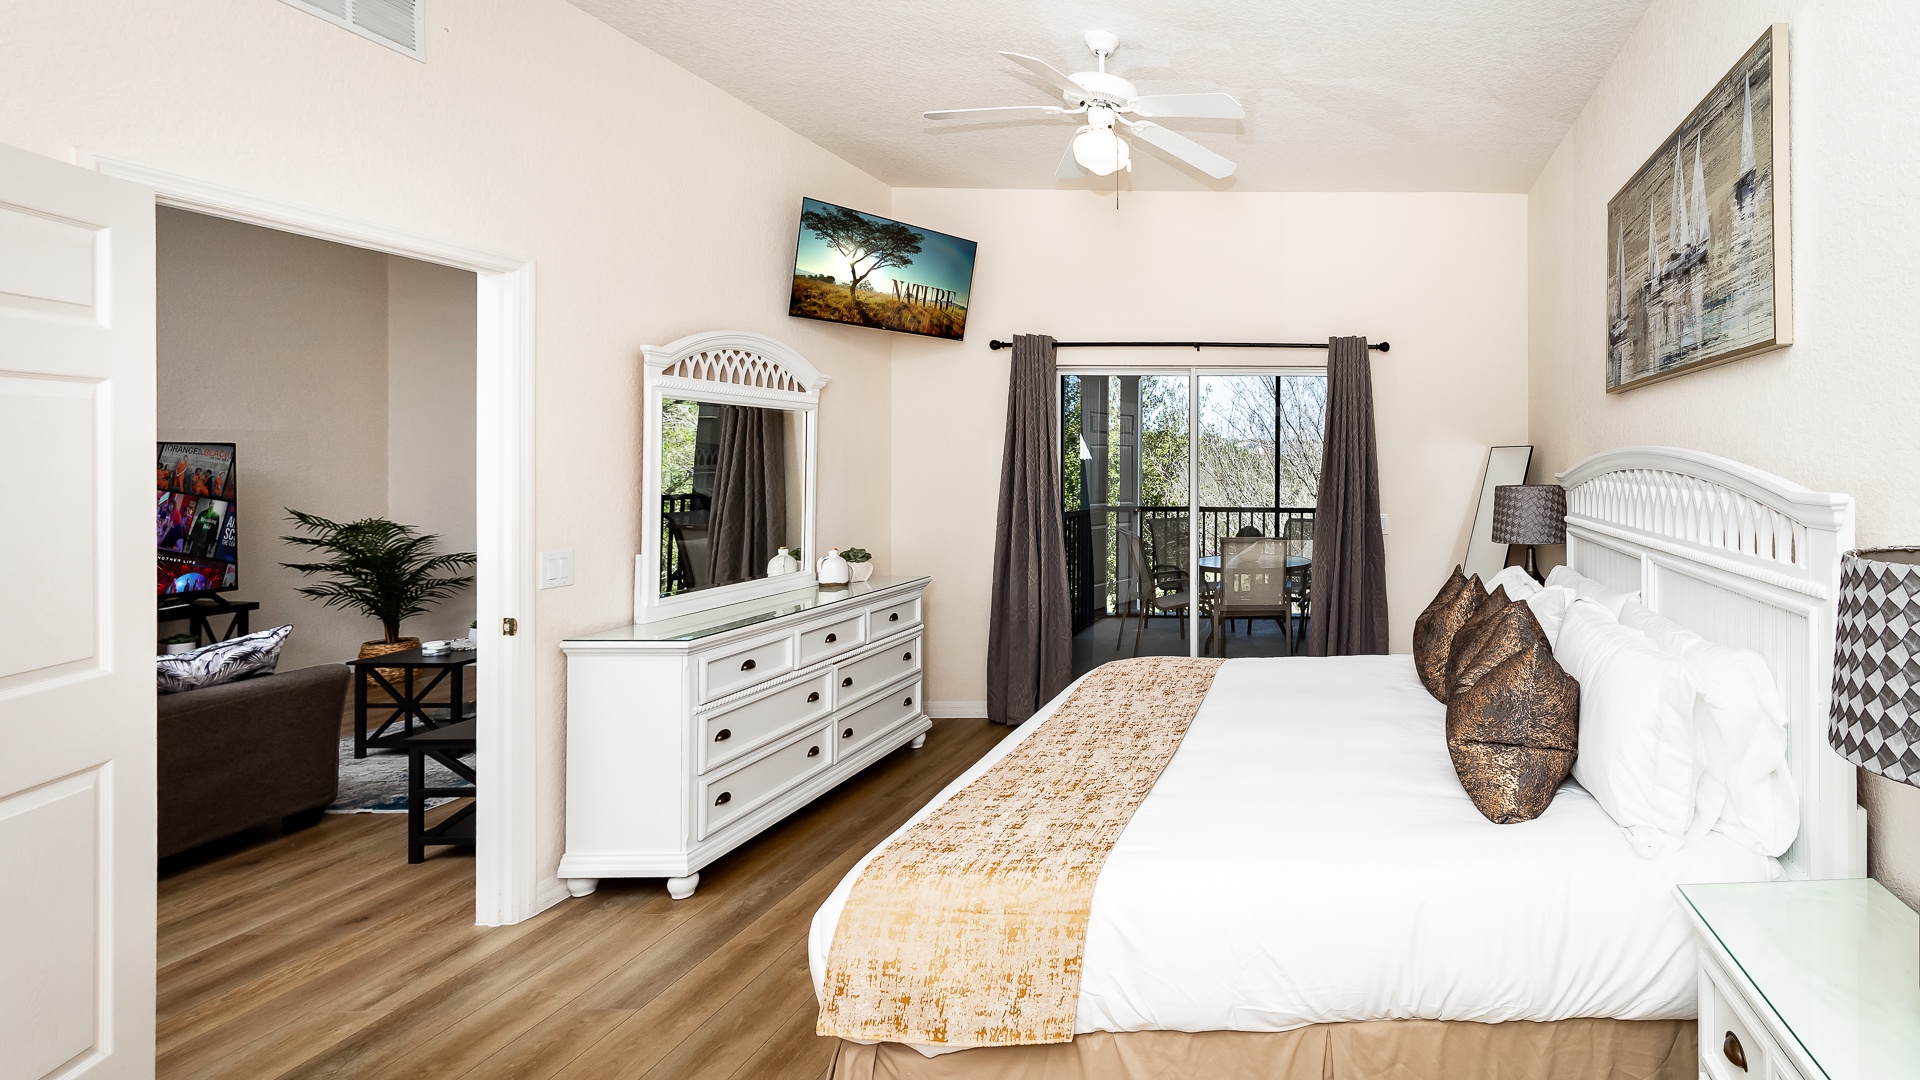 The regal king suite boasts a private ensuite, Smart TV, & balcony access